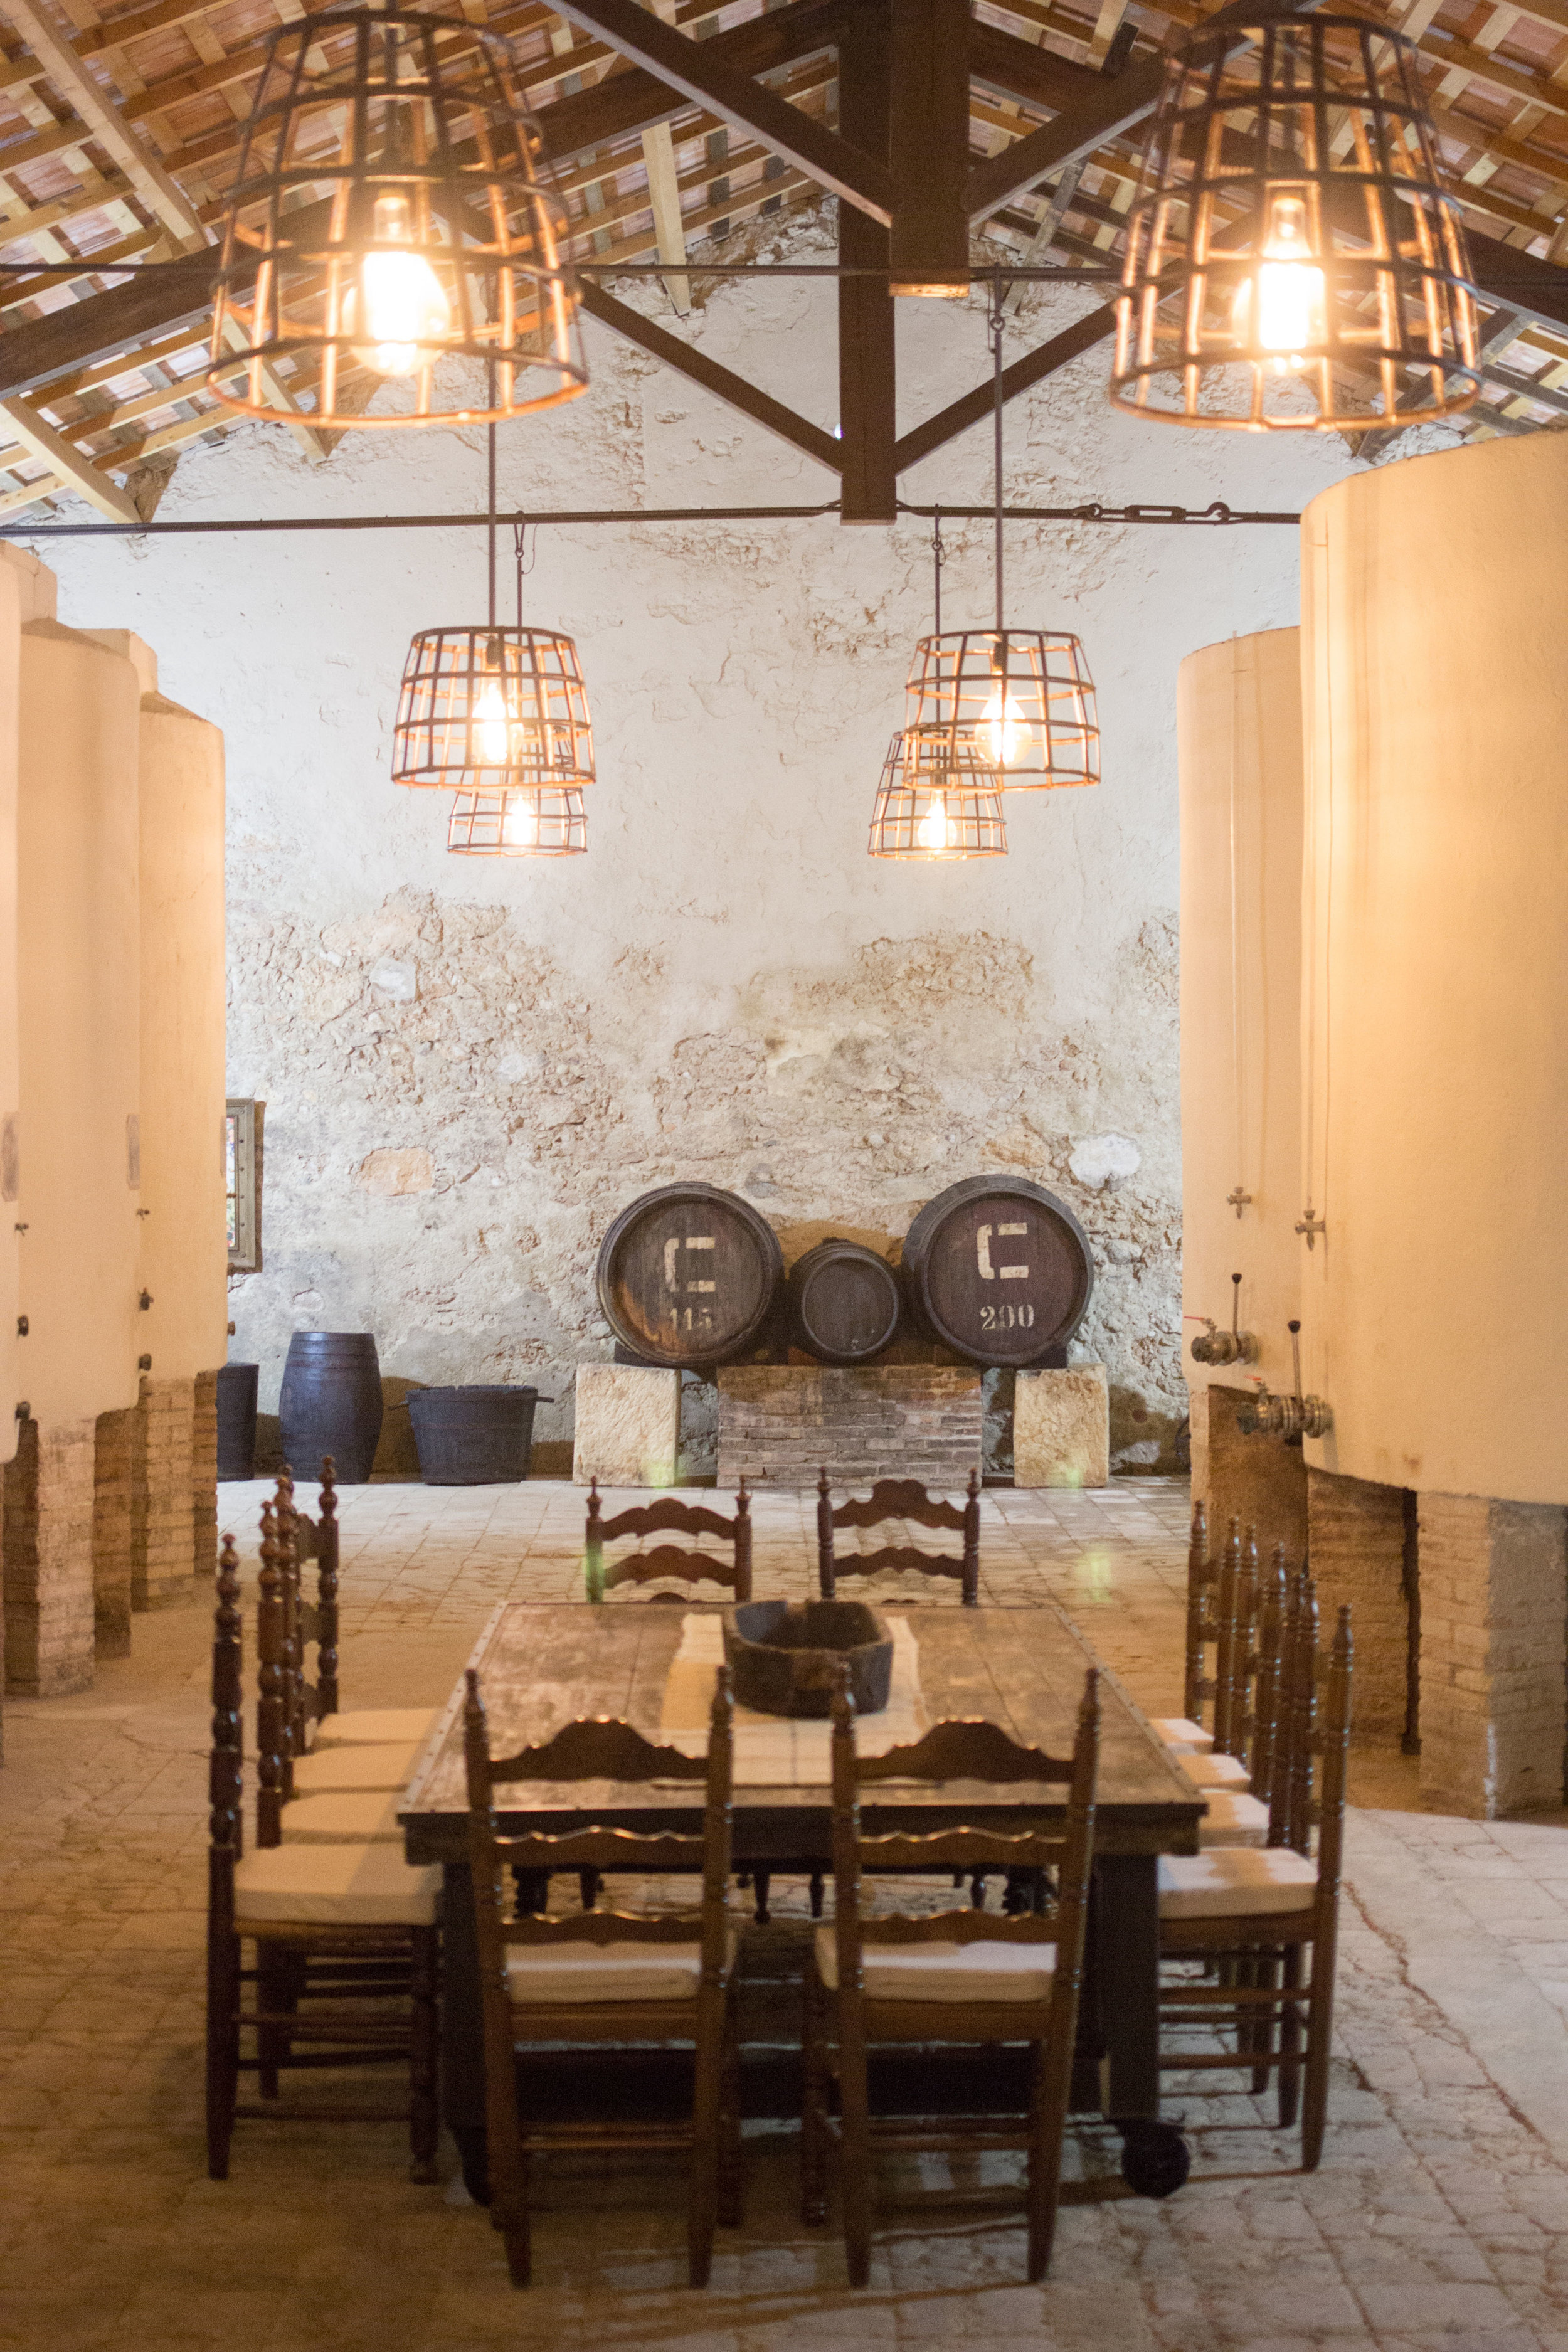 Design light fixtures, high ceiling, large cool space with a handmade upcycled table in the middle and vintage wine barrels in the background